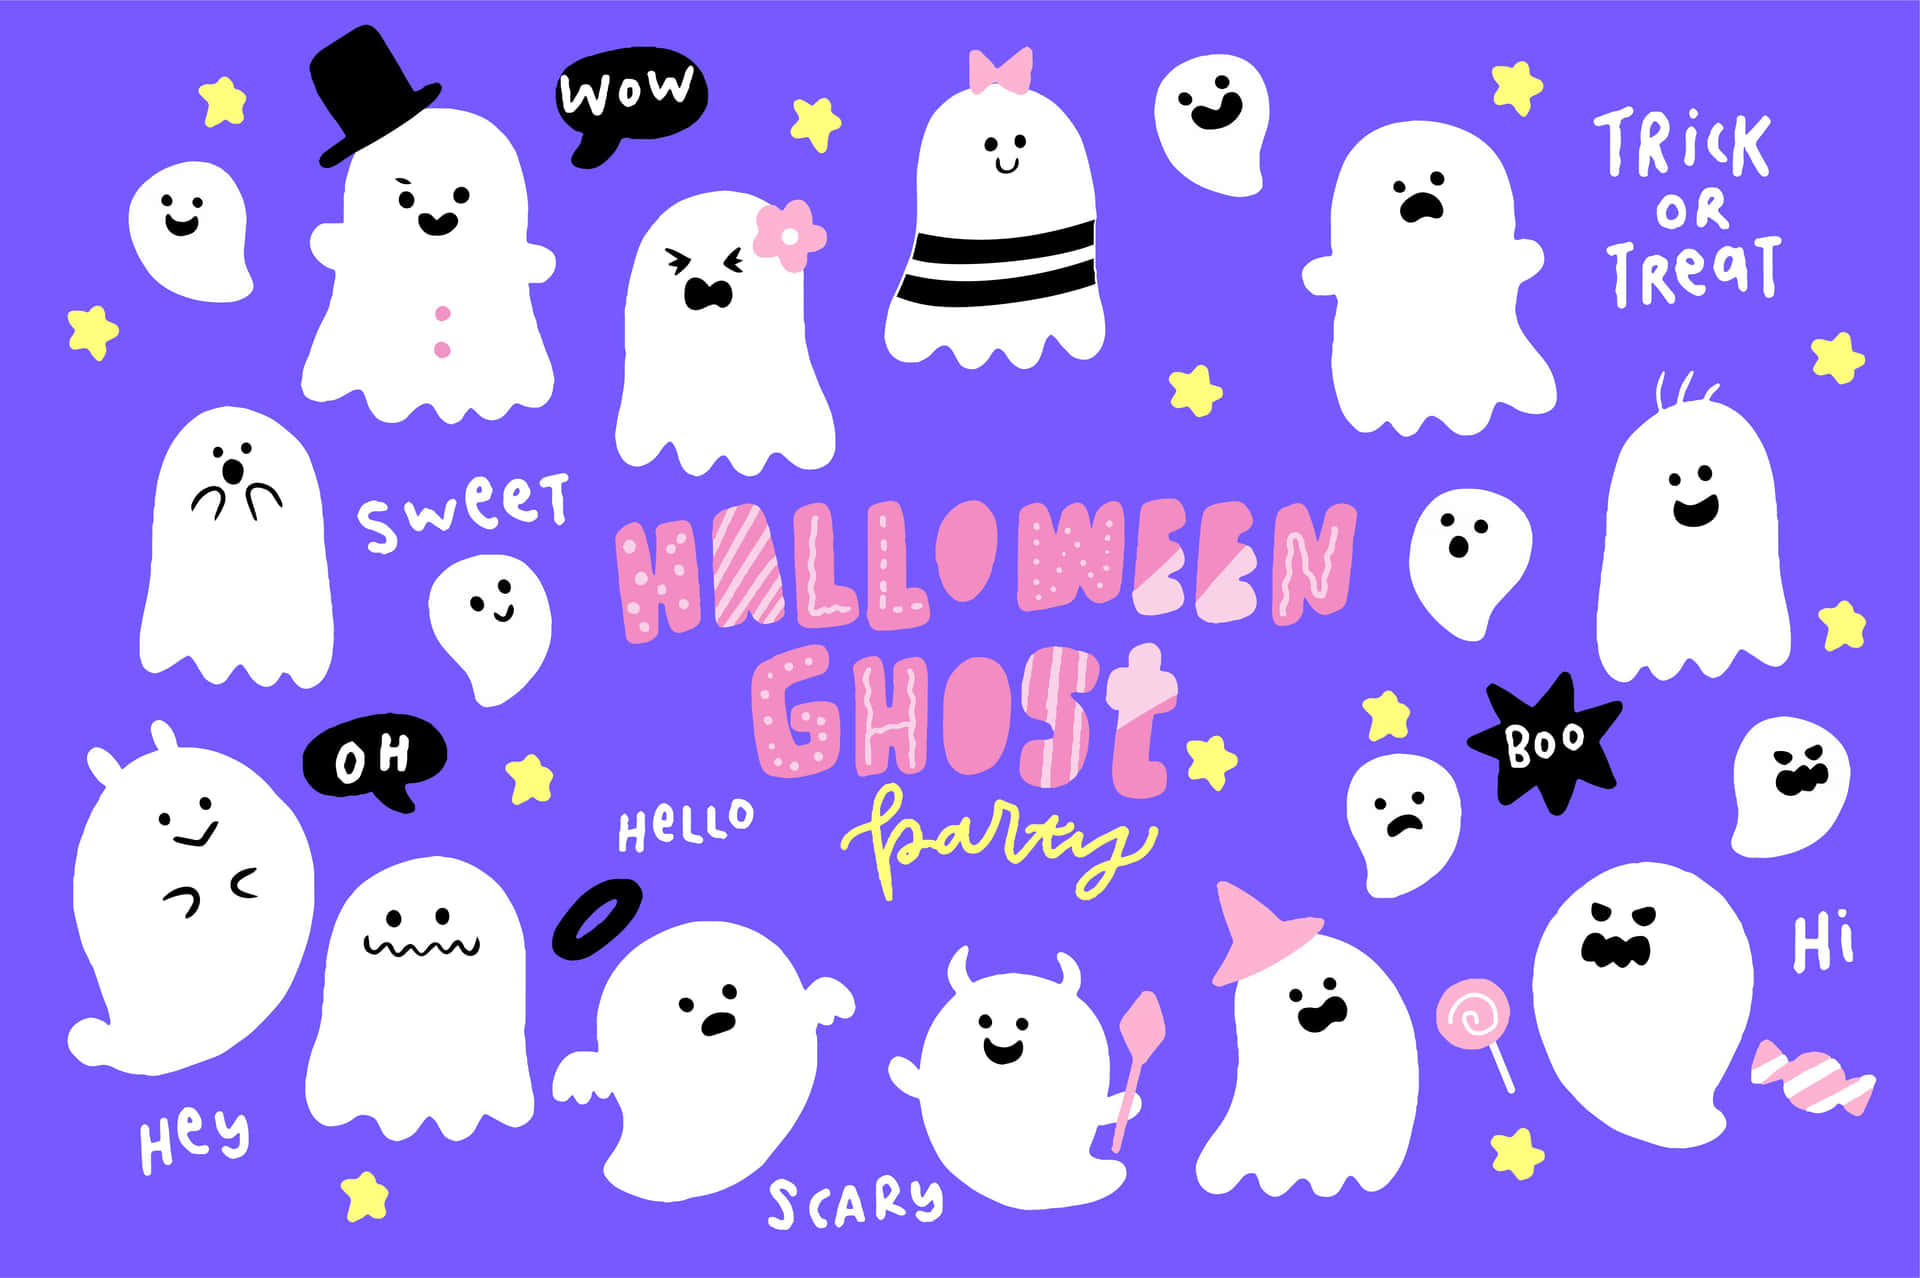 Welcome to the spooktastic season of Cute Halloween!